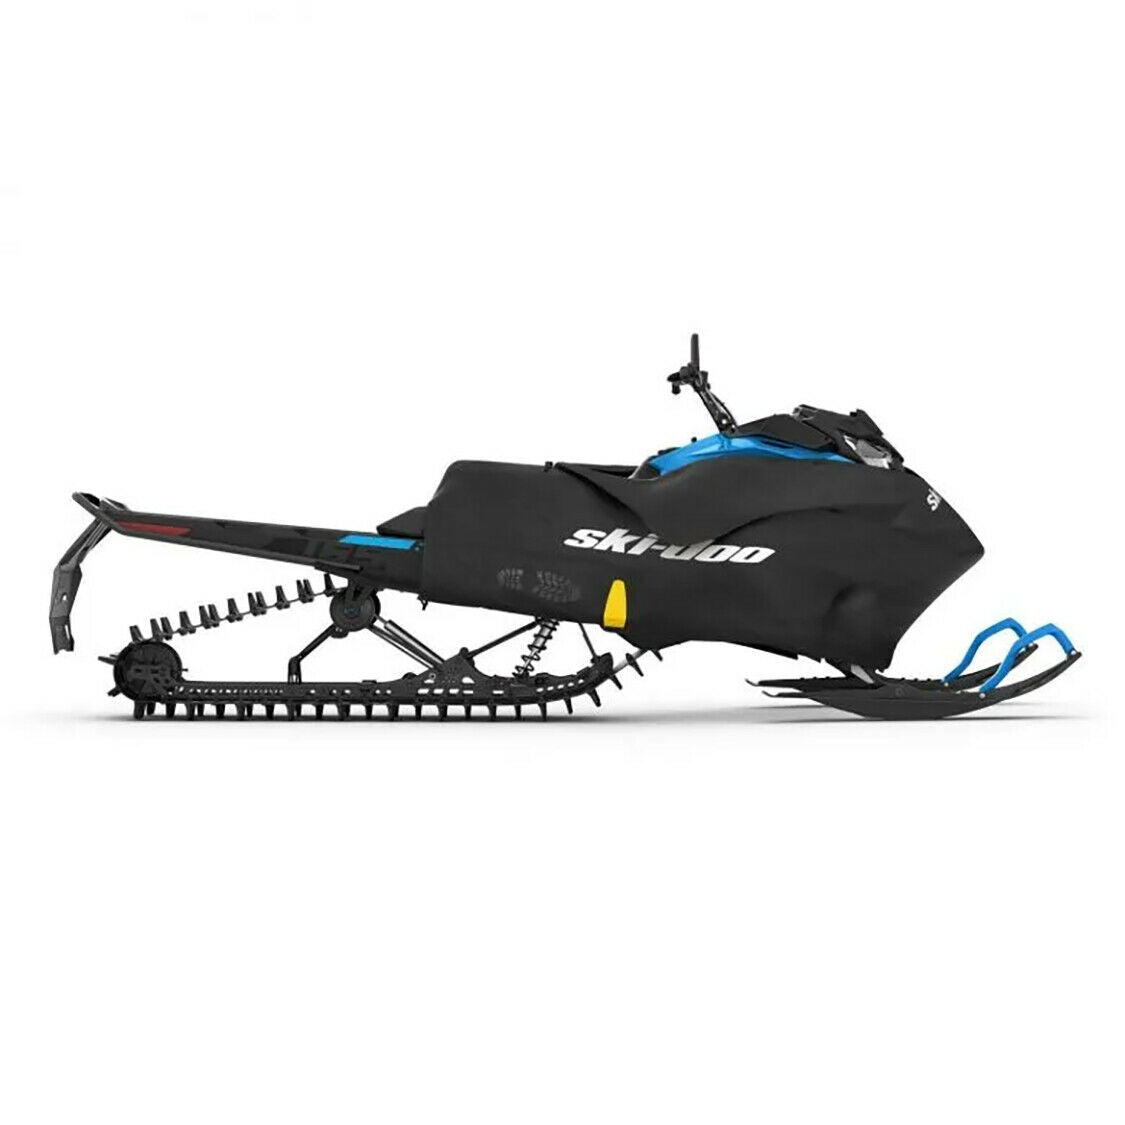 Ski-Doo Ride On Cover (ROC) System 860201908